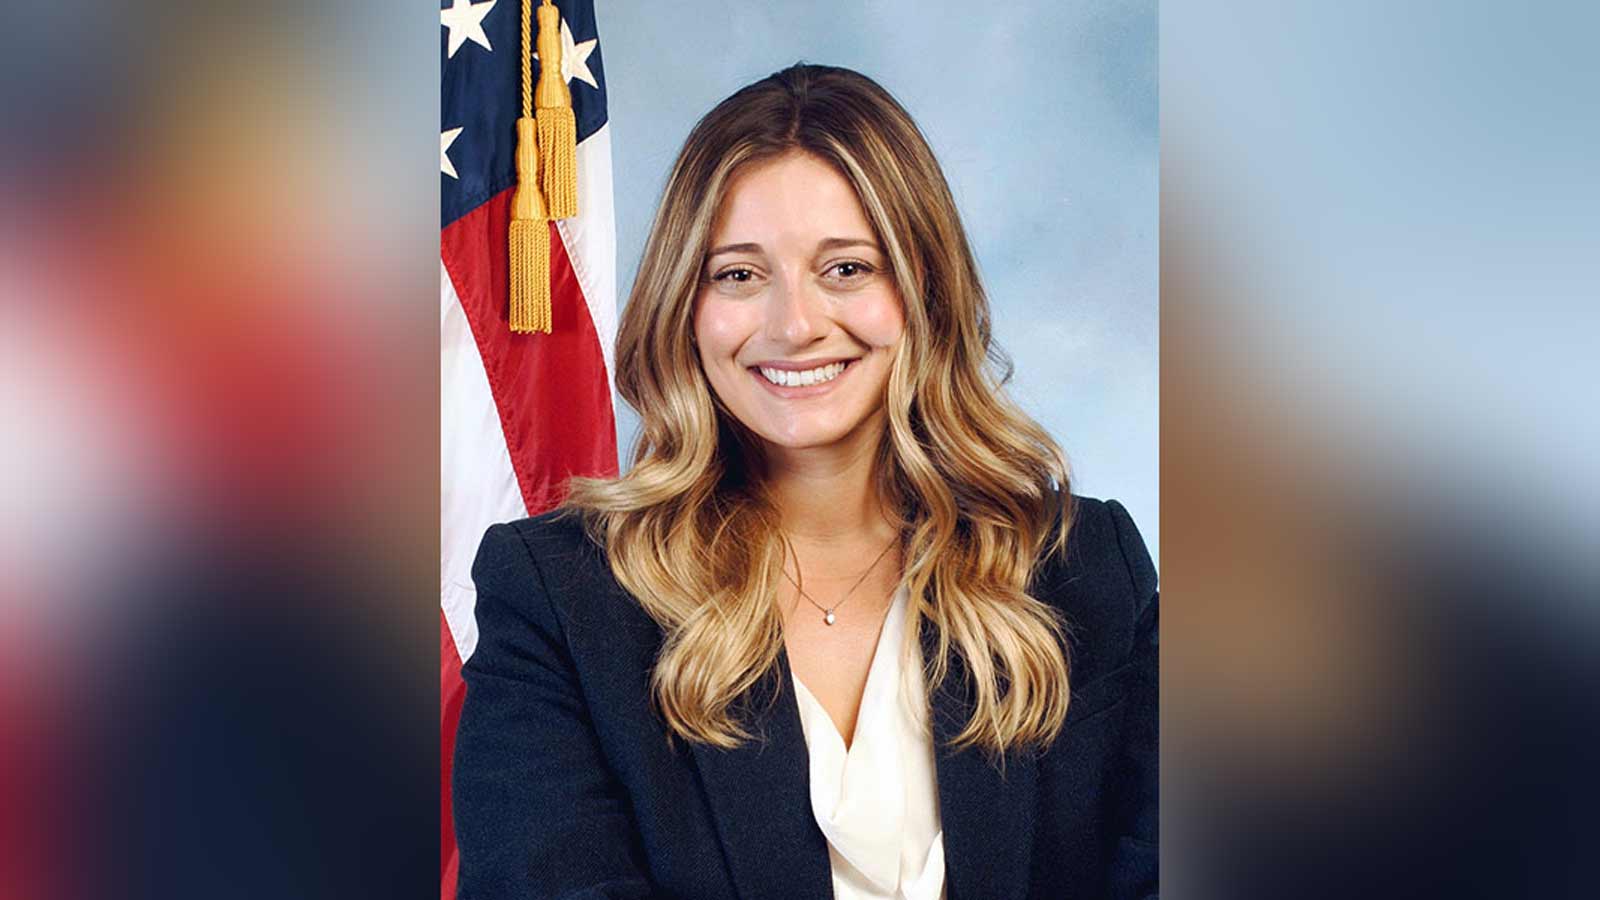 Political Science Alumna now serves as Special Assistant U.S. Attorney